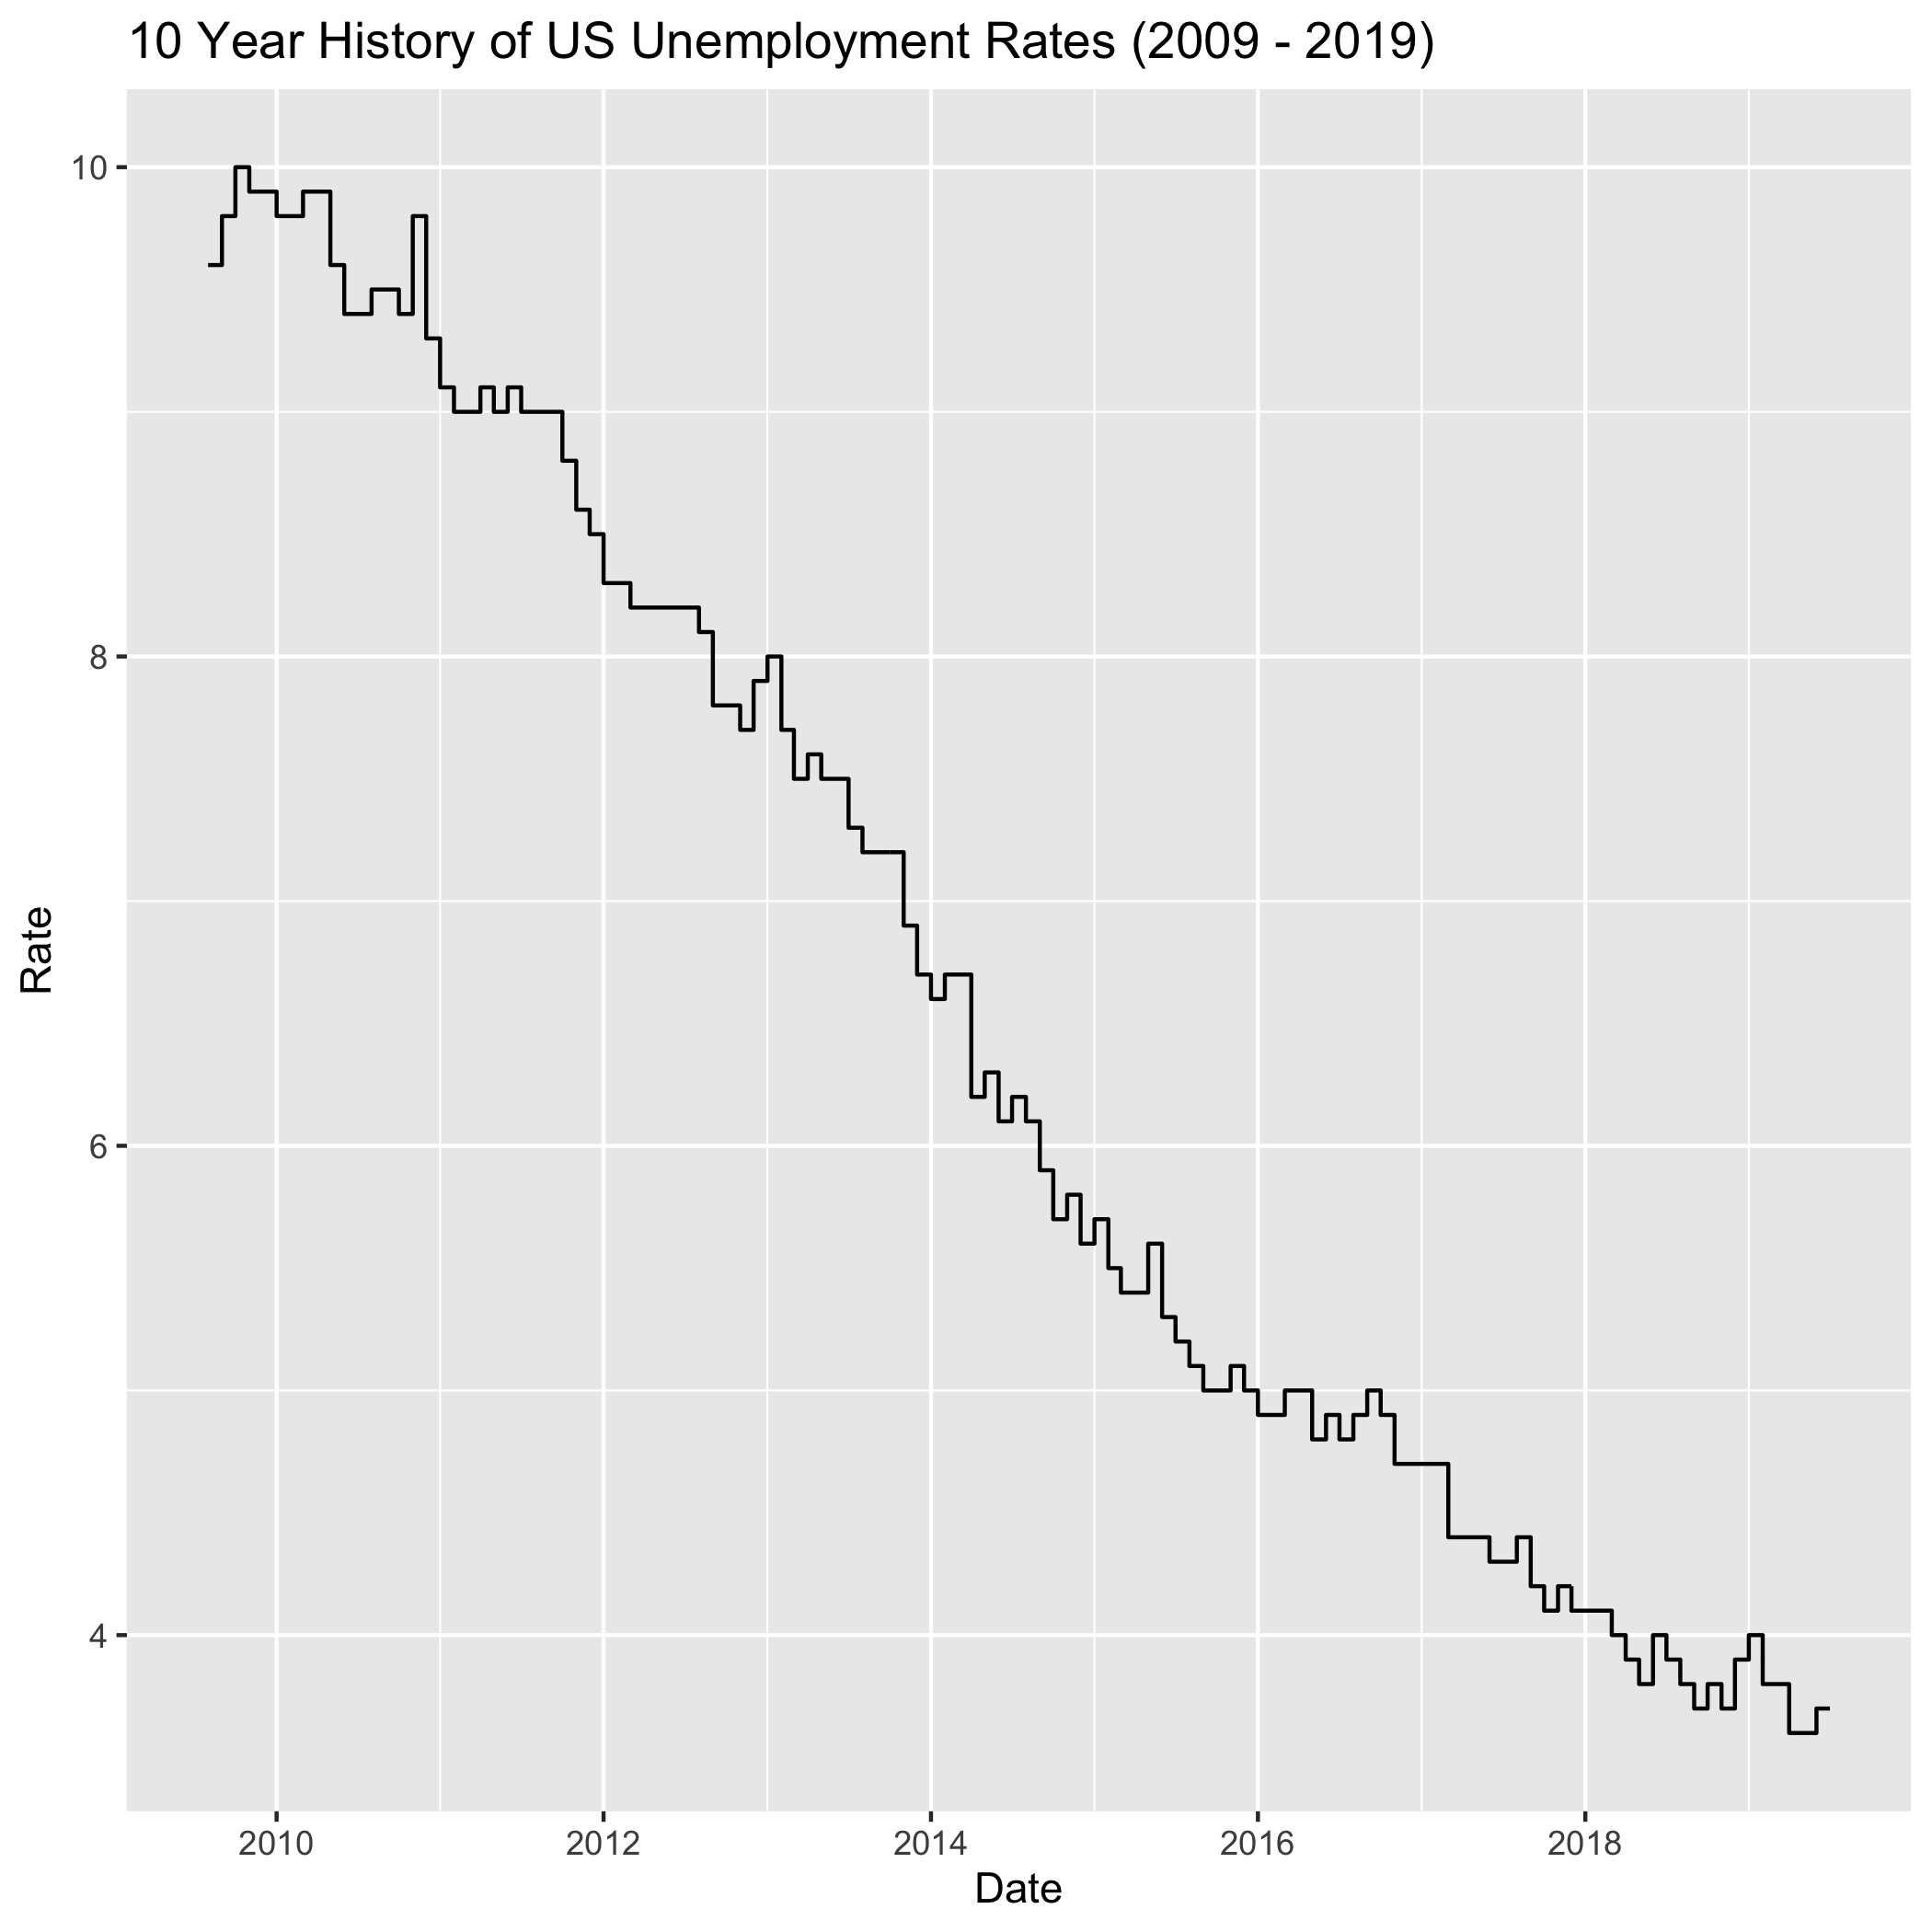 Showing US unemployment rates using both geom_point and geom_step